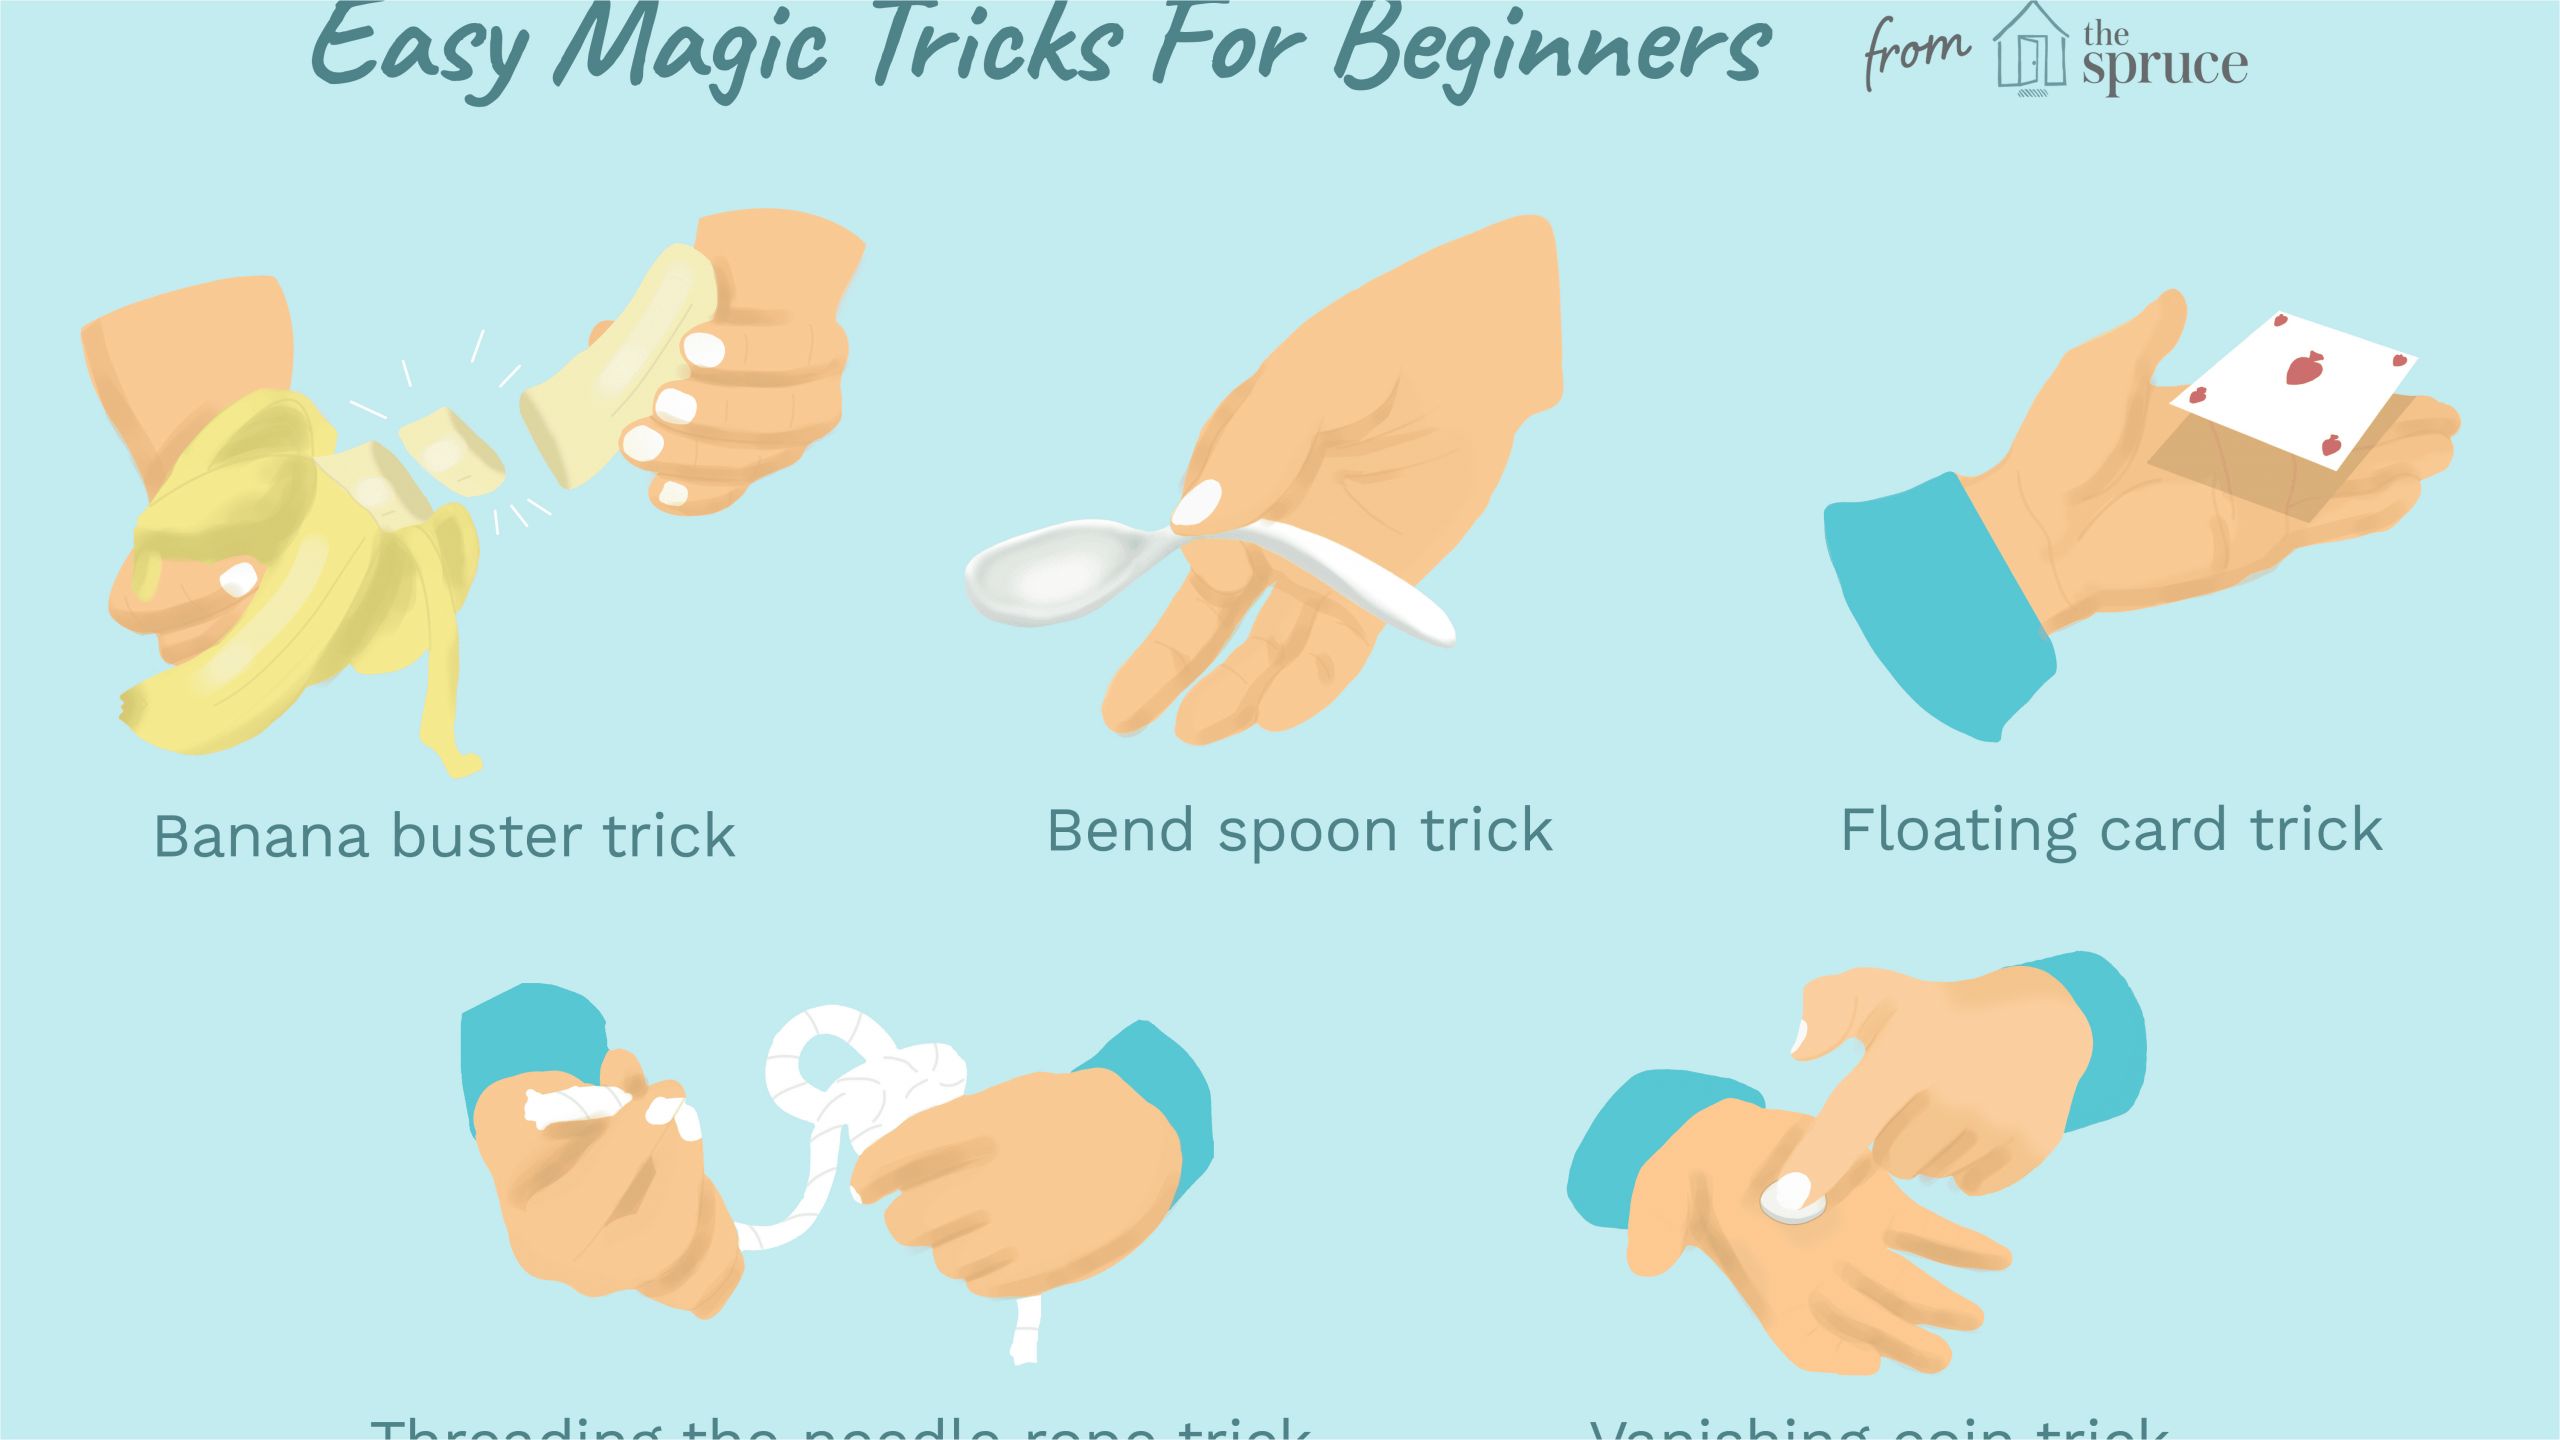 magic tricks for beginners and kids 2267083v3 5bbe4d7e46e0fb0026c5a395 png